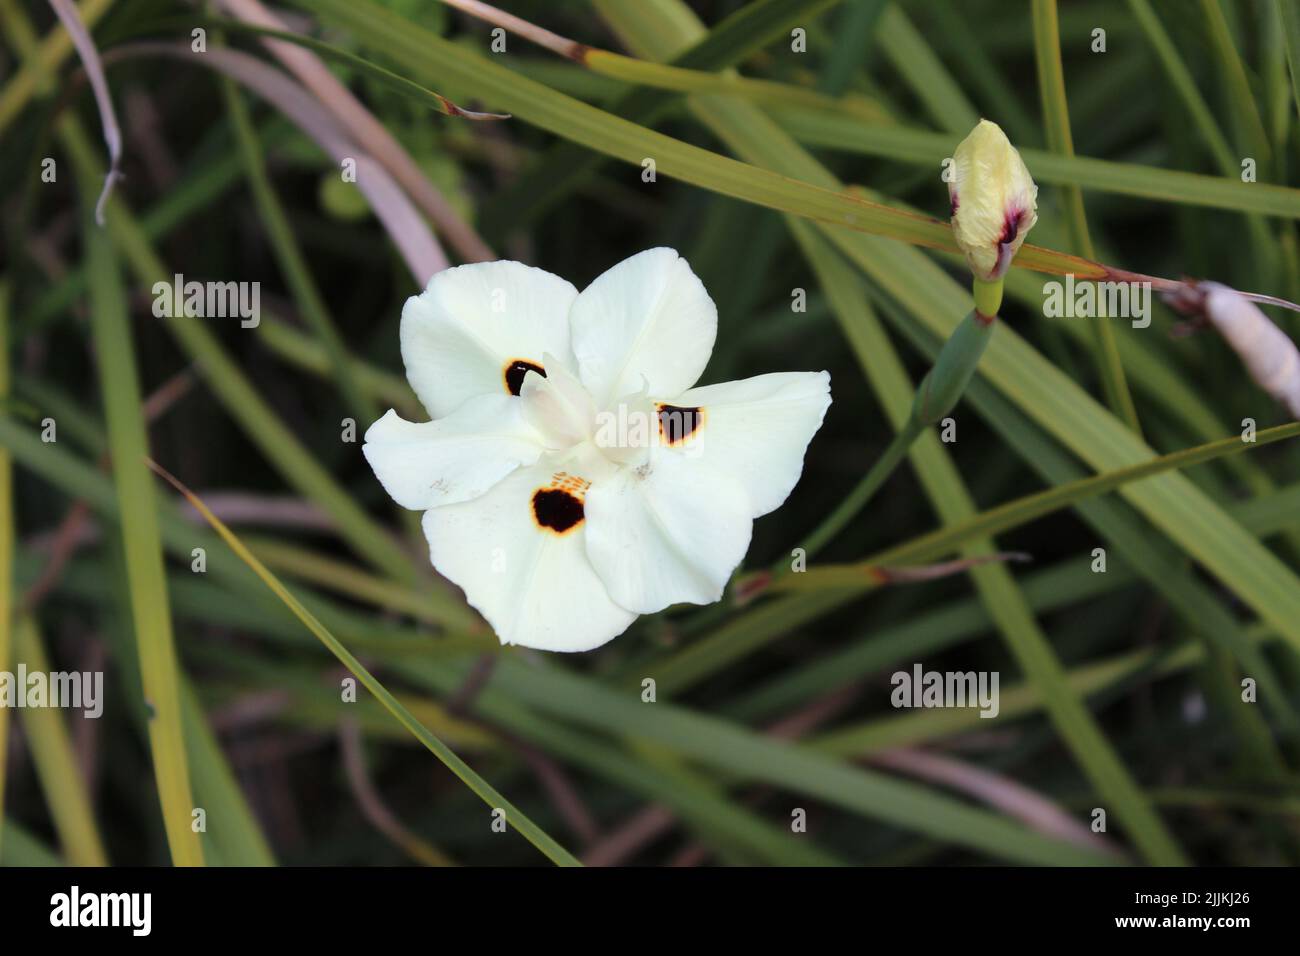 A closeup shot of the dietes bicolor flower growing in the garden Stock Photo